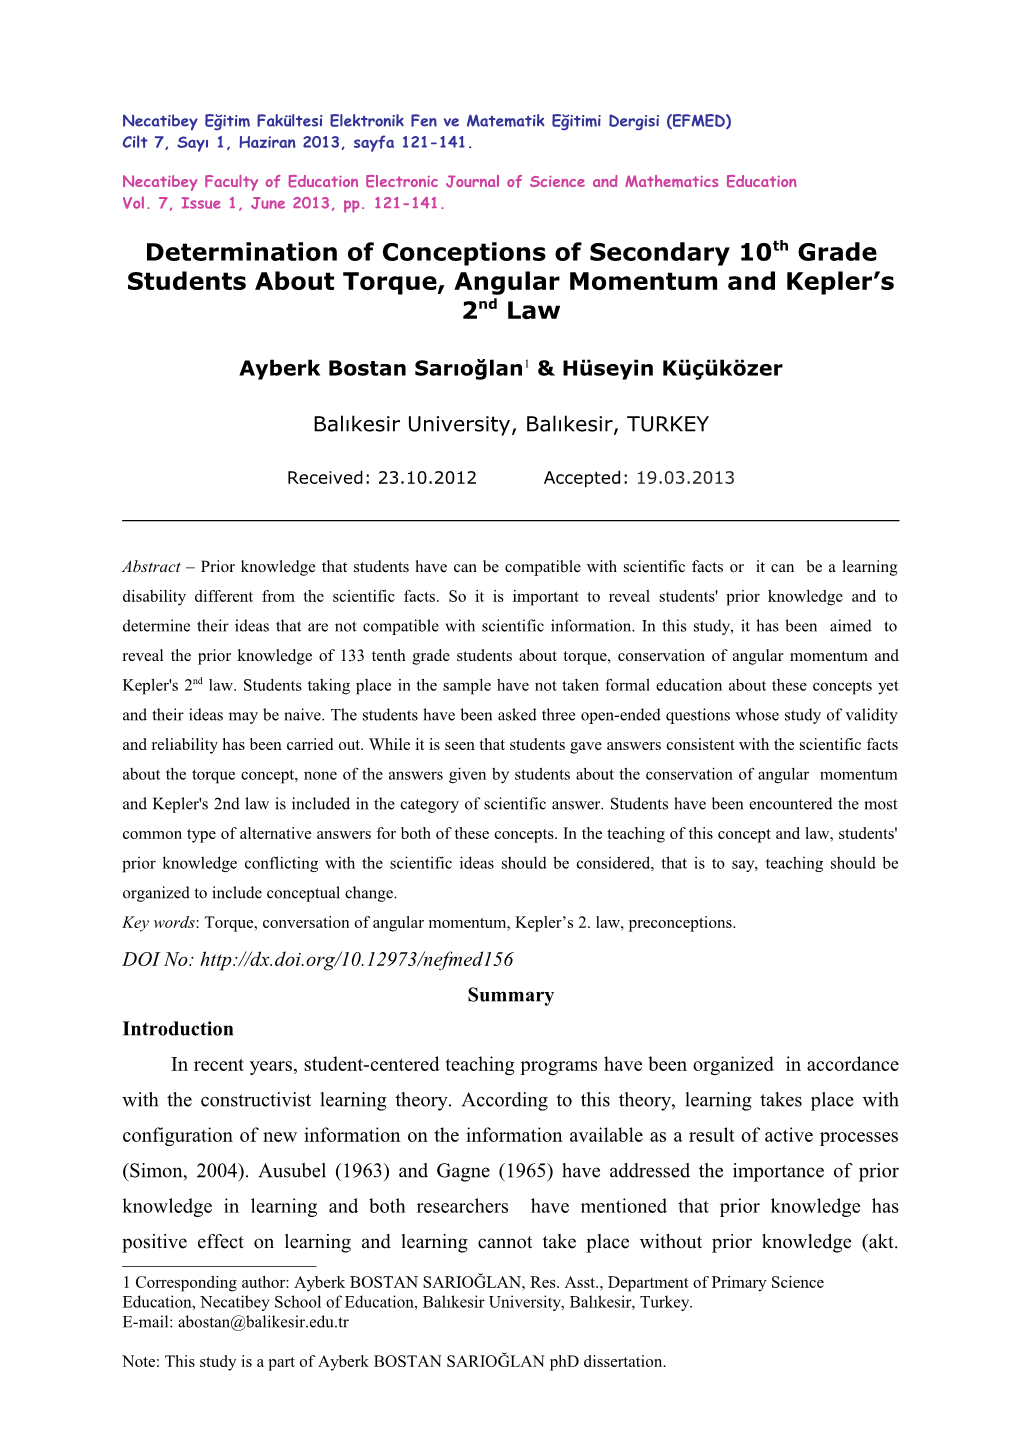 Determination of Conceptions of Secondary 10Th Grade Students About Torque, Angular Momentum